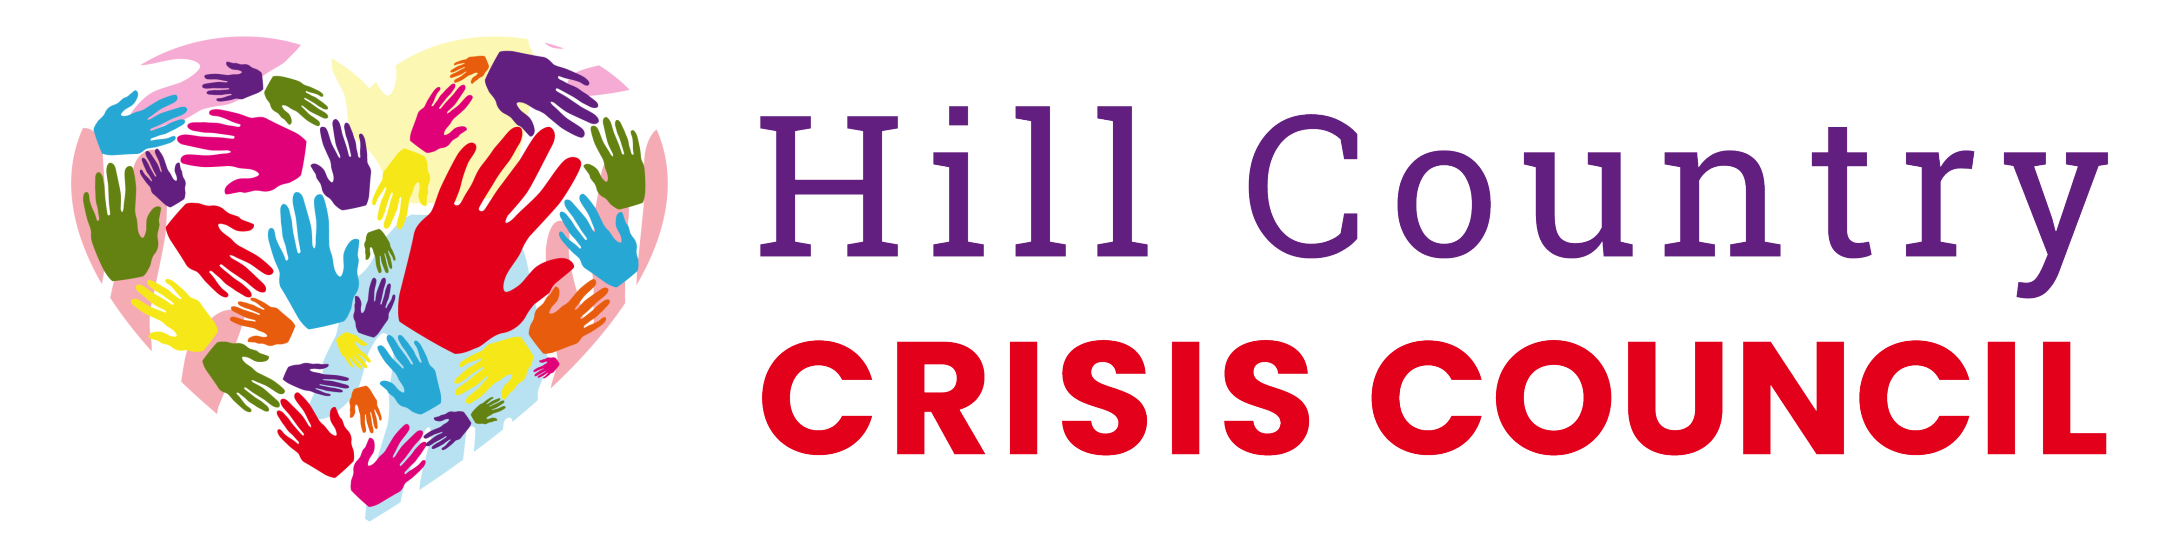 Hill Country Crisis Council